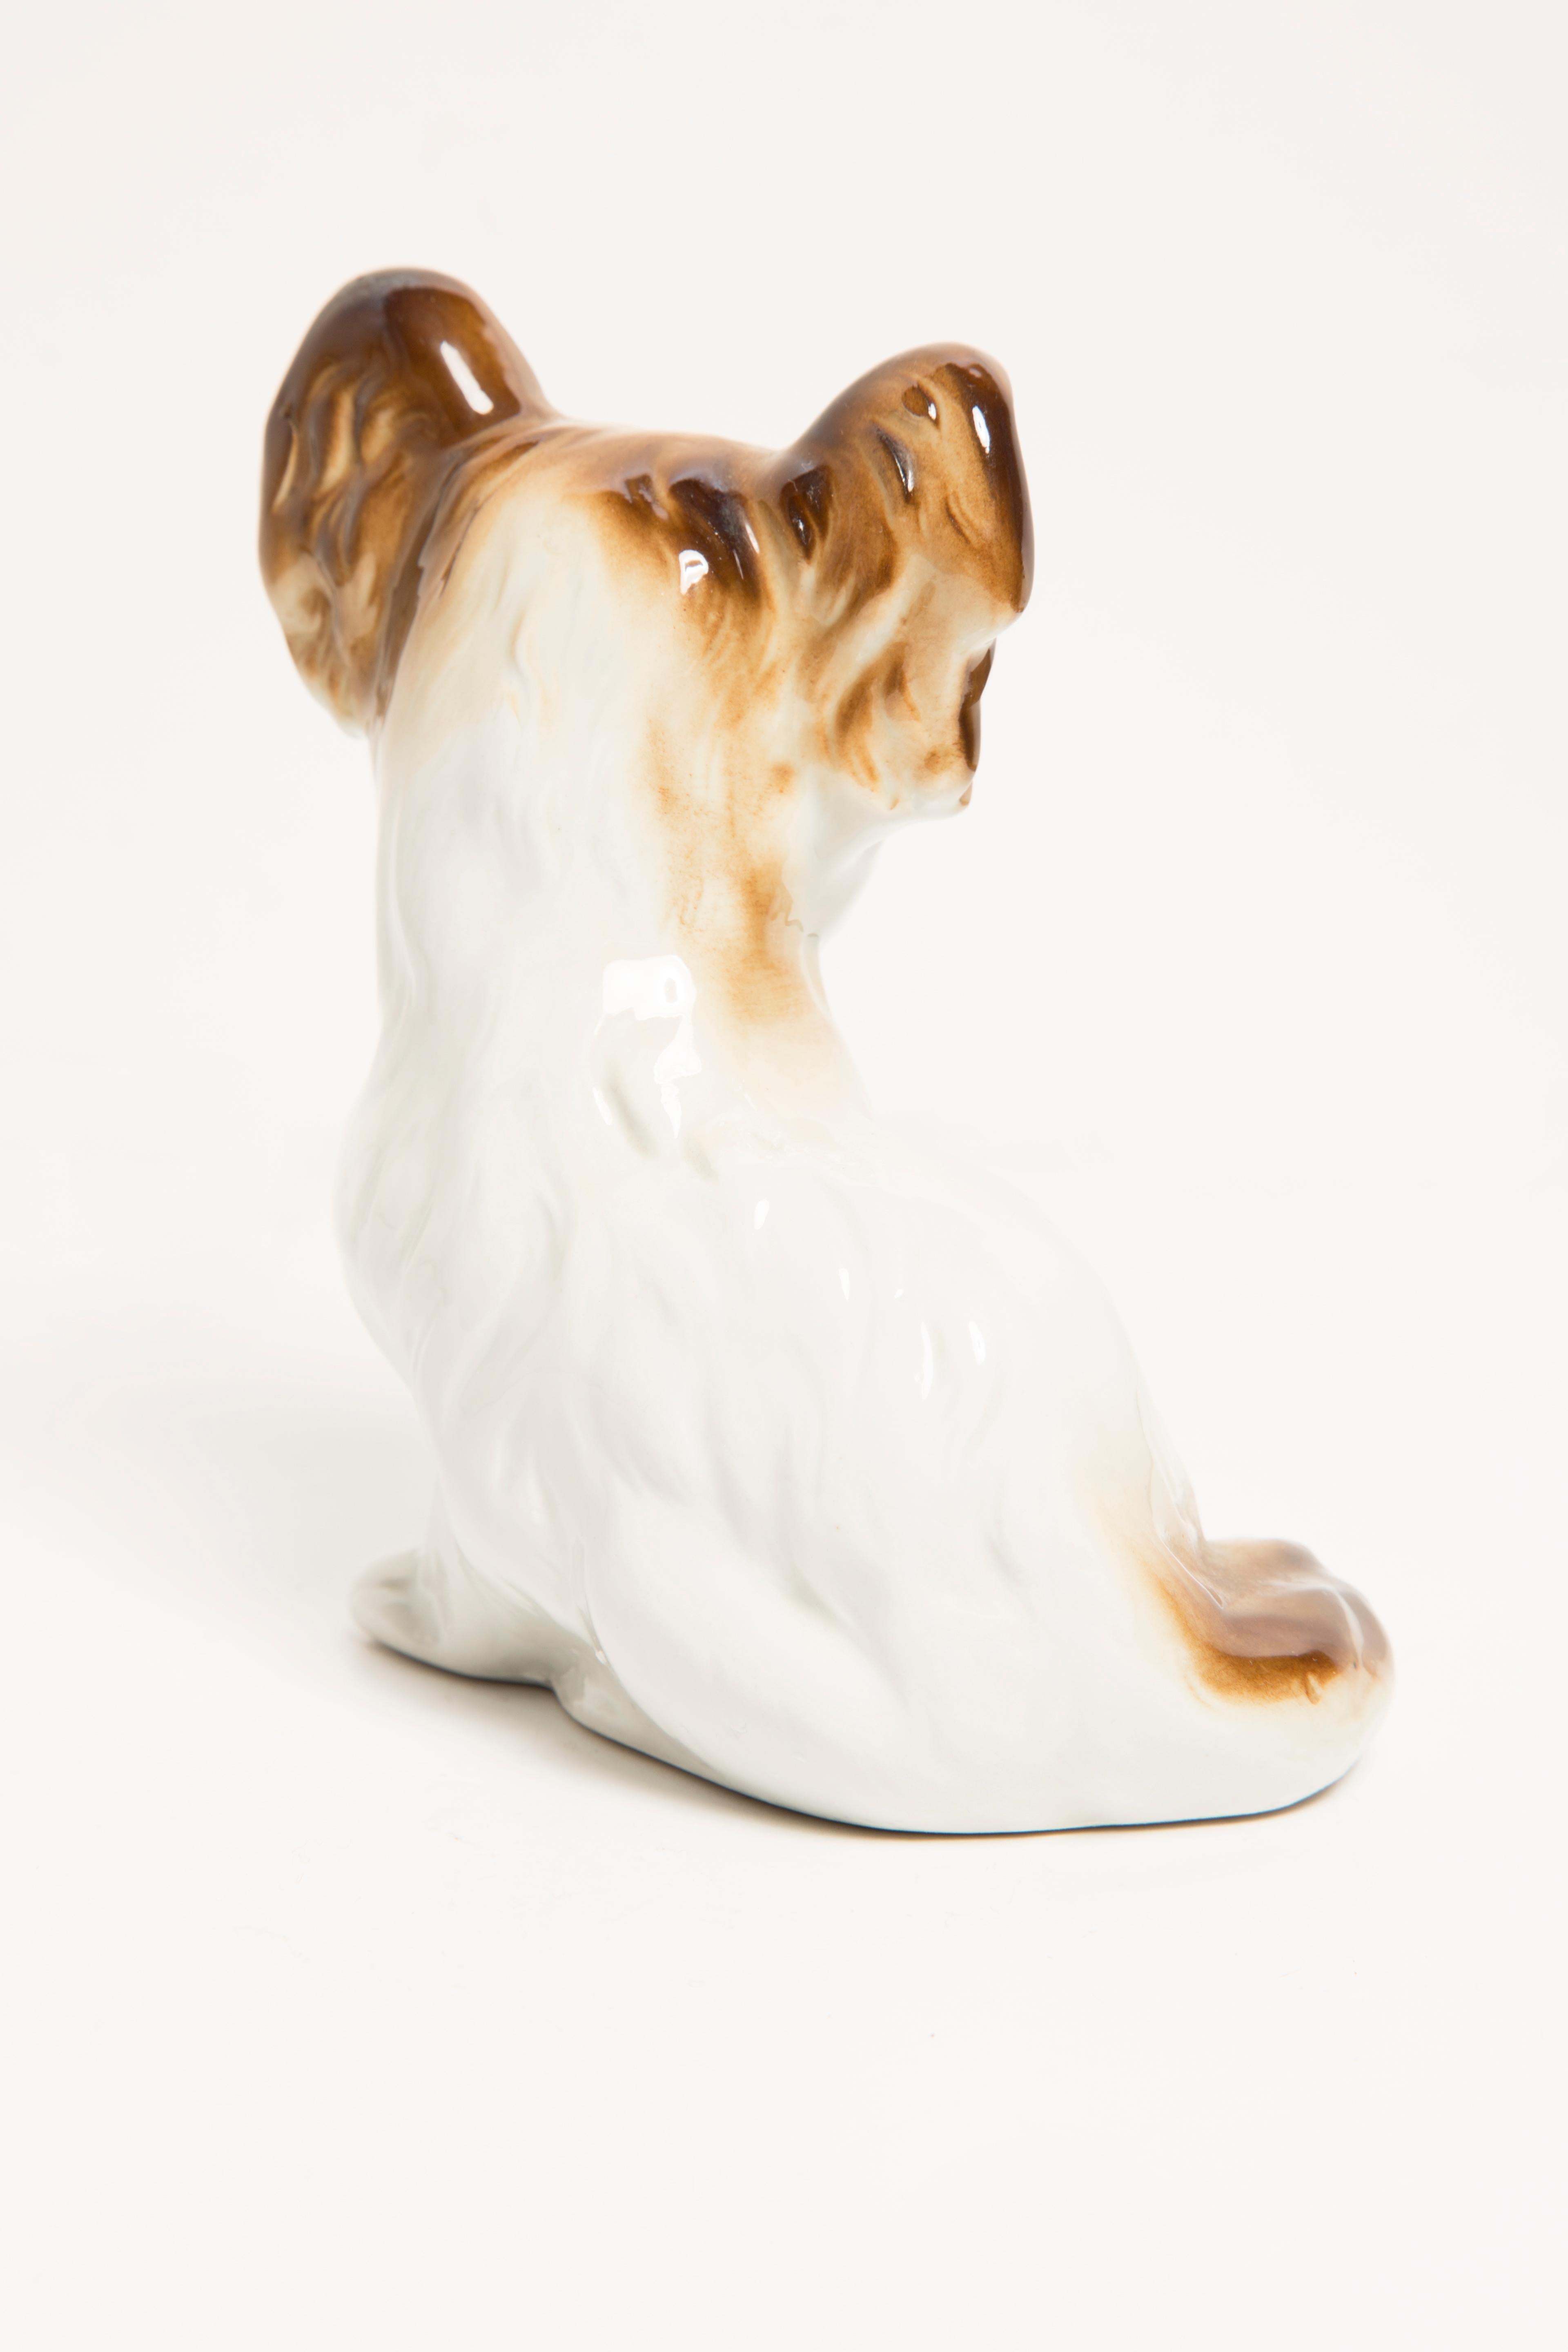 Ceramic Midcentury Small White Terrier Dog Sculpture, Italy, 1960s For Sale